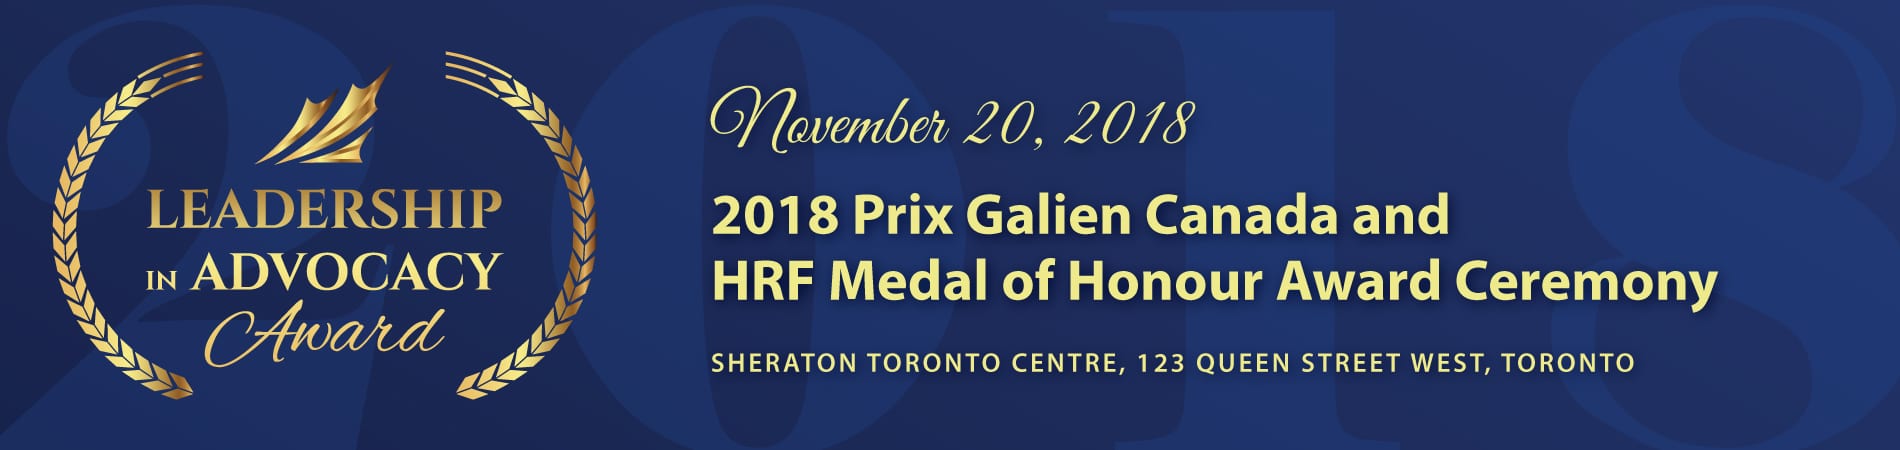 2018 Prix Galien Canada and HRF Medal of Honour Award Ceremony